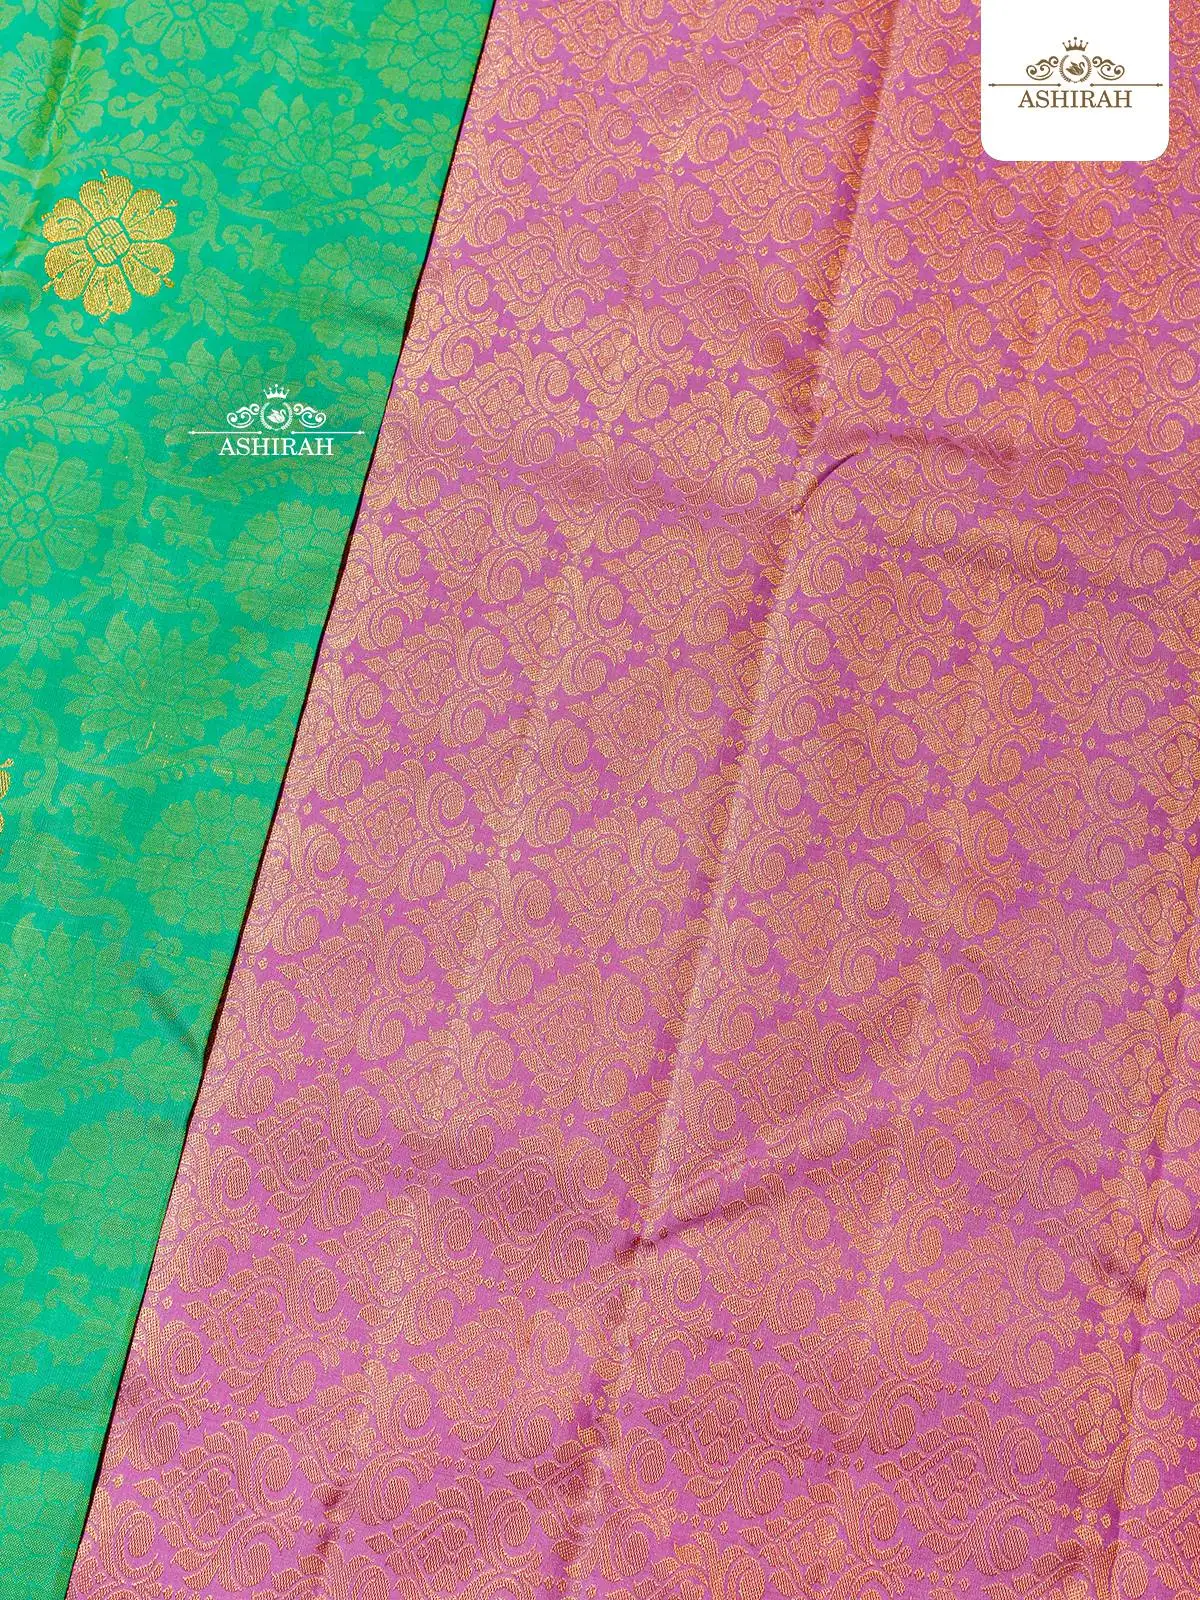 Green Pure Kanchipuram Silk Saree With Brocade And Flower Motifs All Over The Body And Without Border